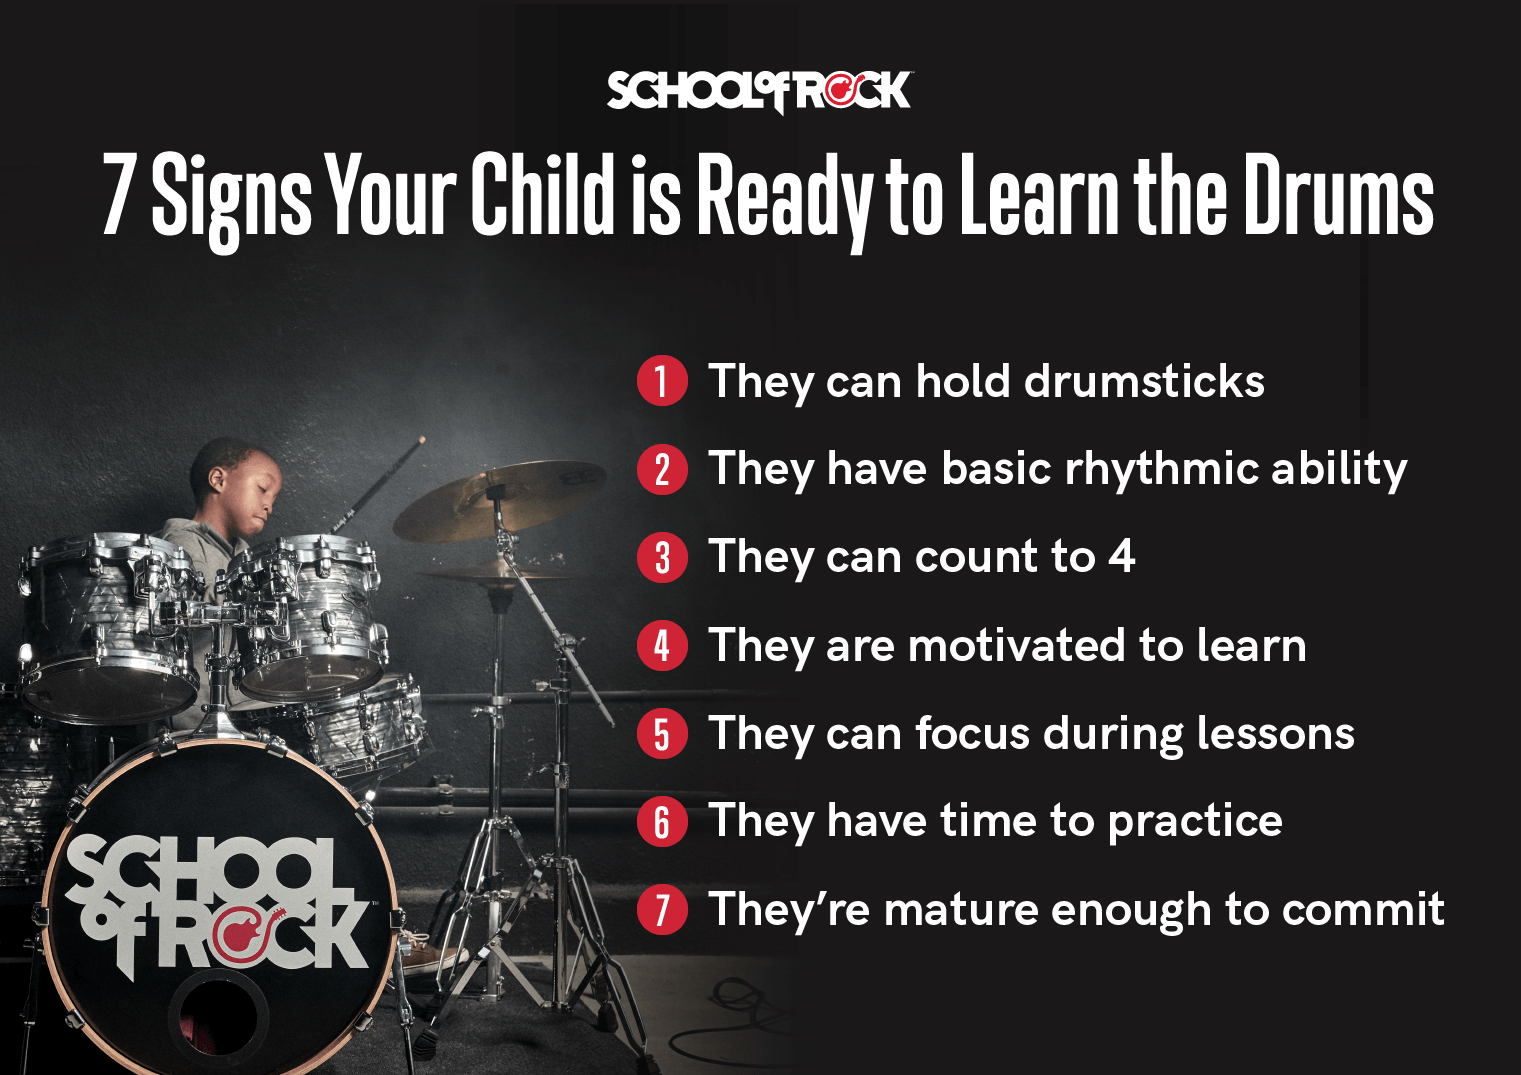 7 signs your child is ready to learn the drums.